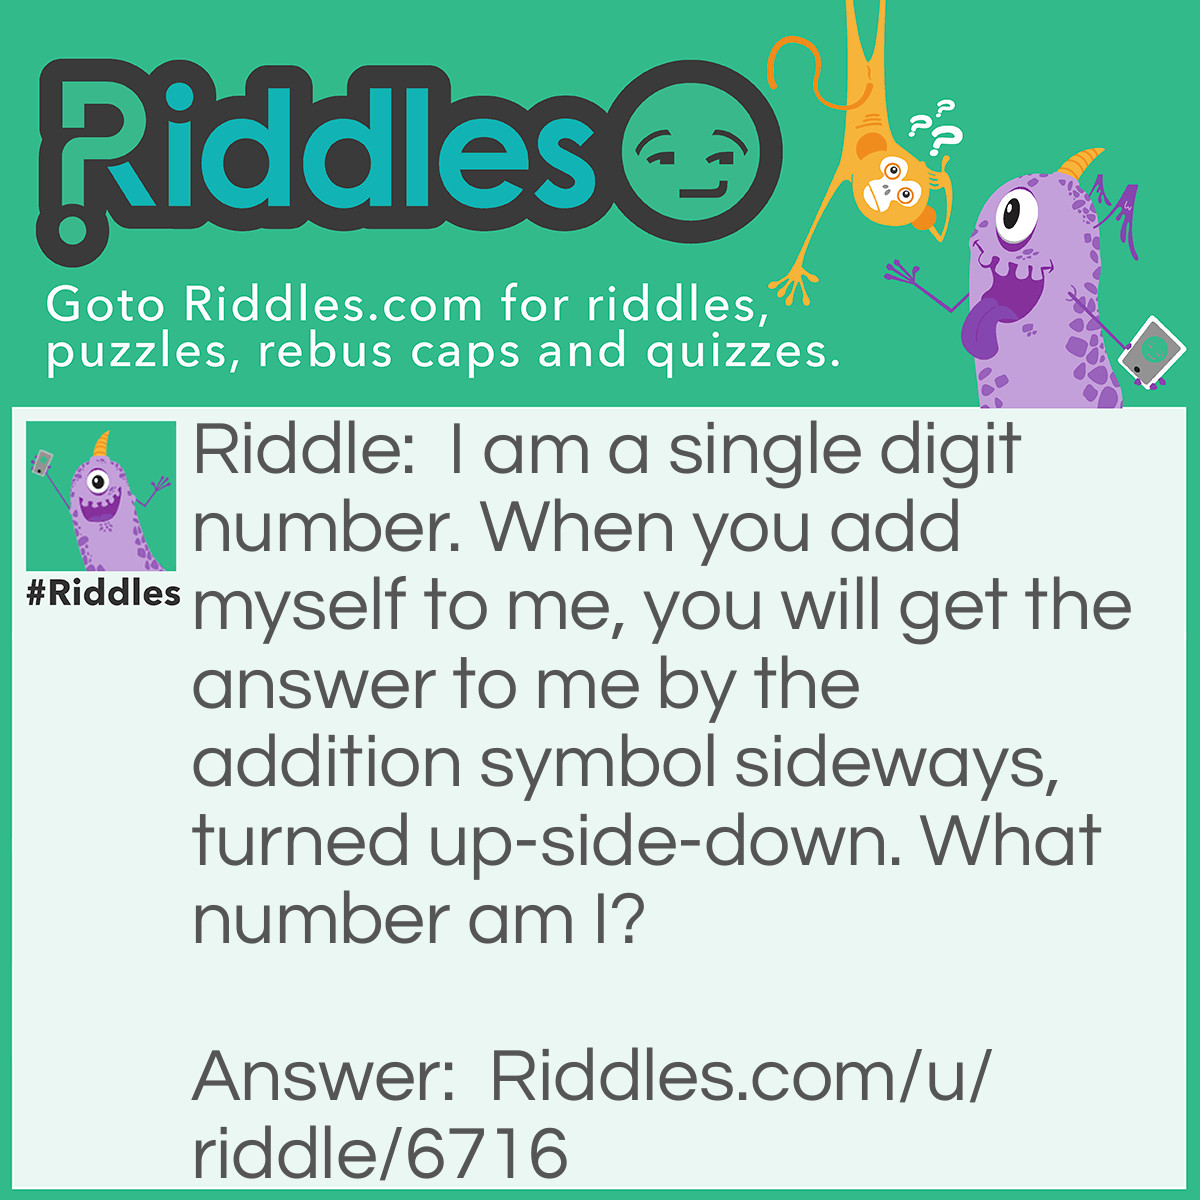 Riddle: I am a single digit number. When you add myself to me, you will get the answer to me by the addition symbol sideways, turned up-side-down. What number am I? Answer: 9, or nine.